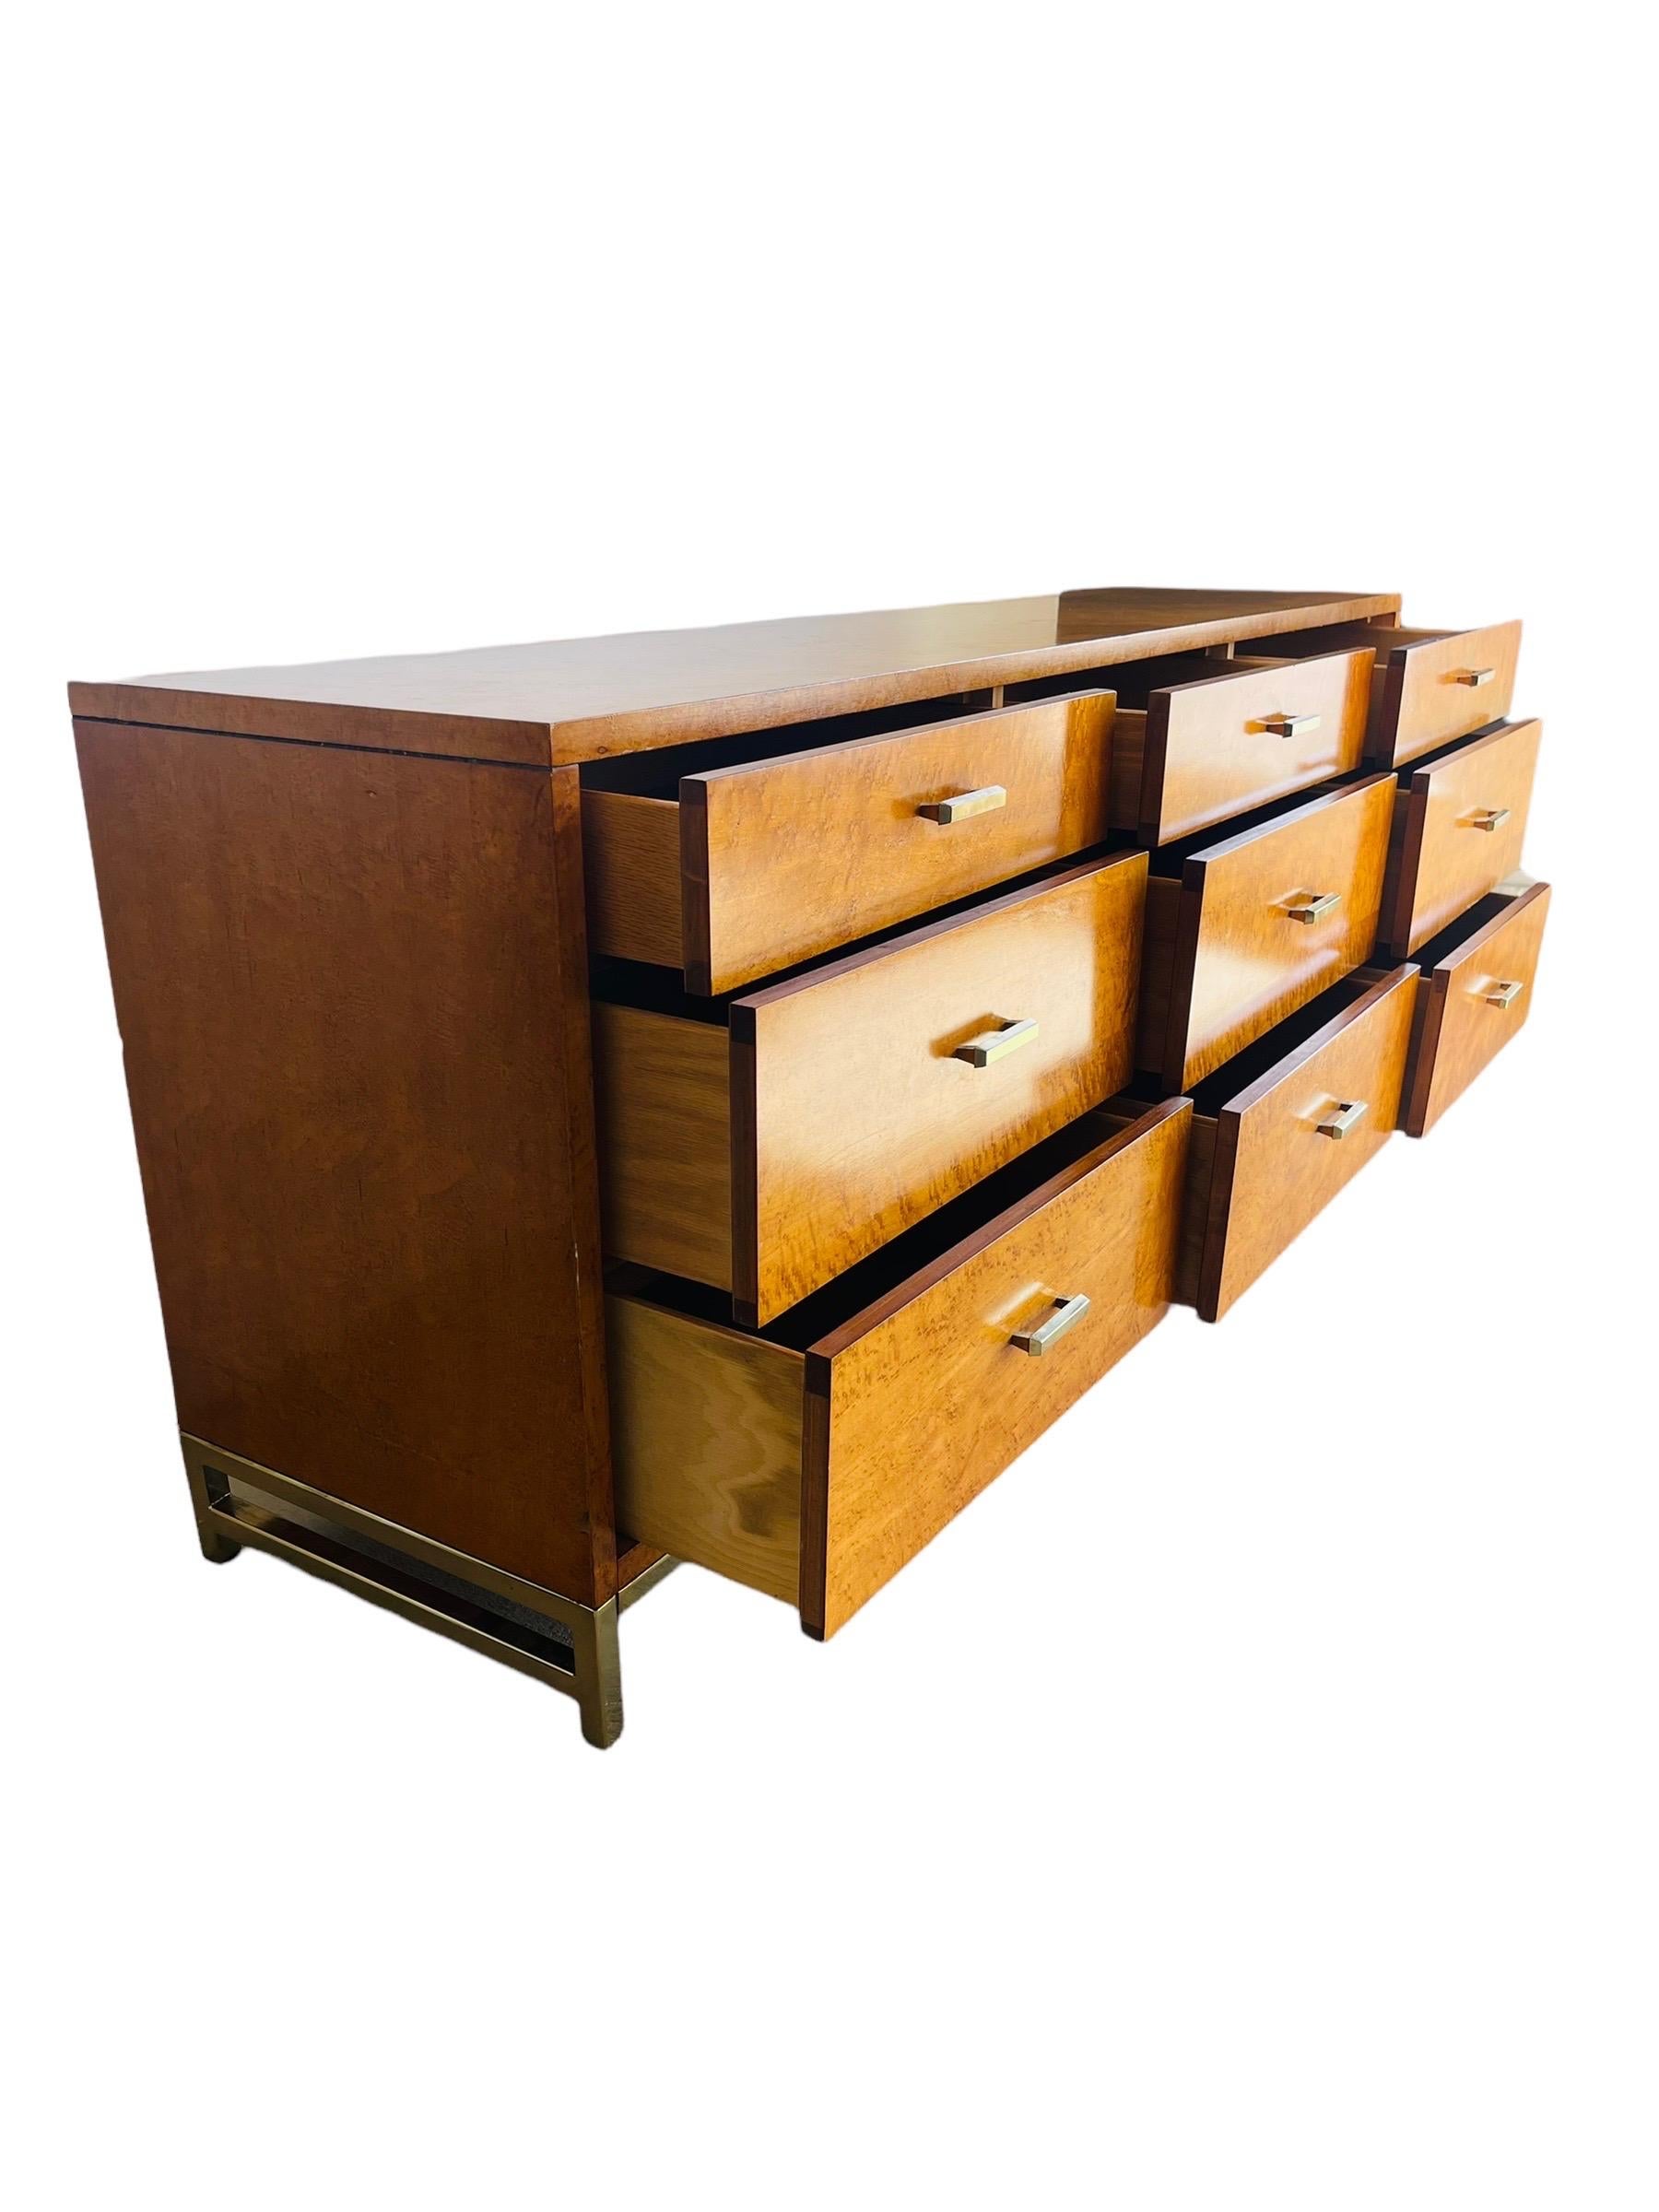 Stunning Mid-Century Modern birdseye maple dresser by Milo Baughman for Lane Furniture. This dresser is equipped 9 drawers and brass drawer pulls and base. The dresser is in good vintage condition with normal wear consistent with age and use.